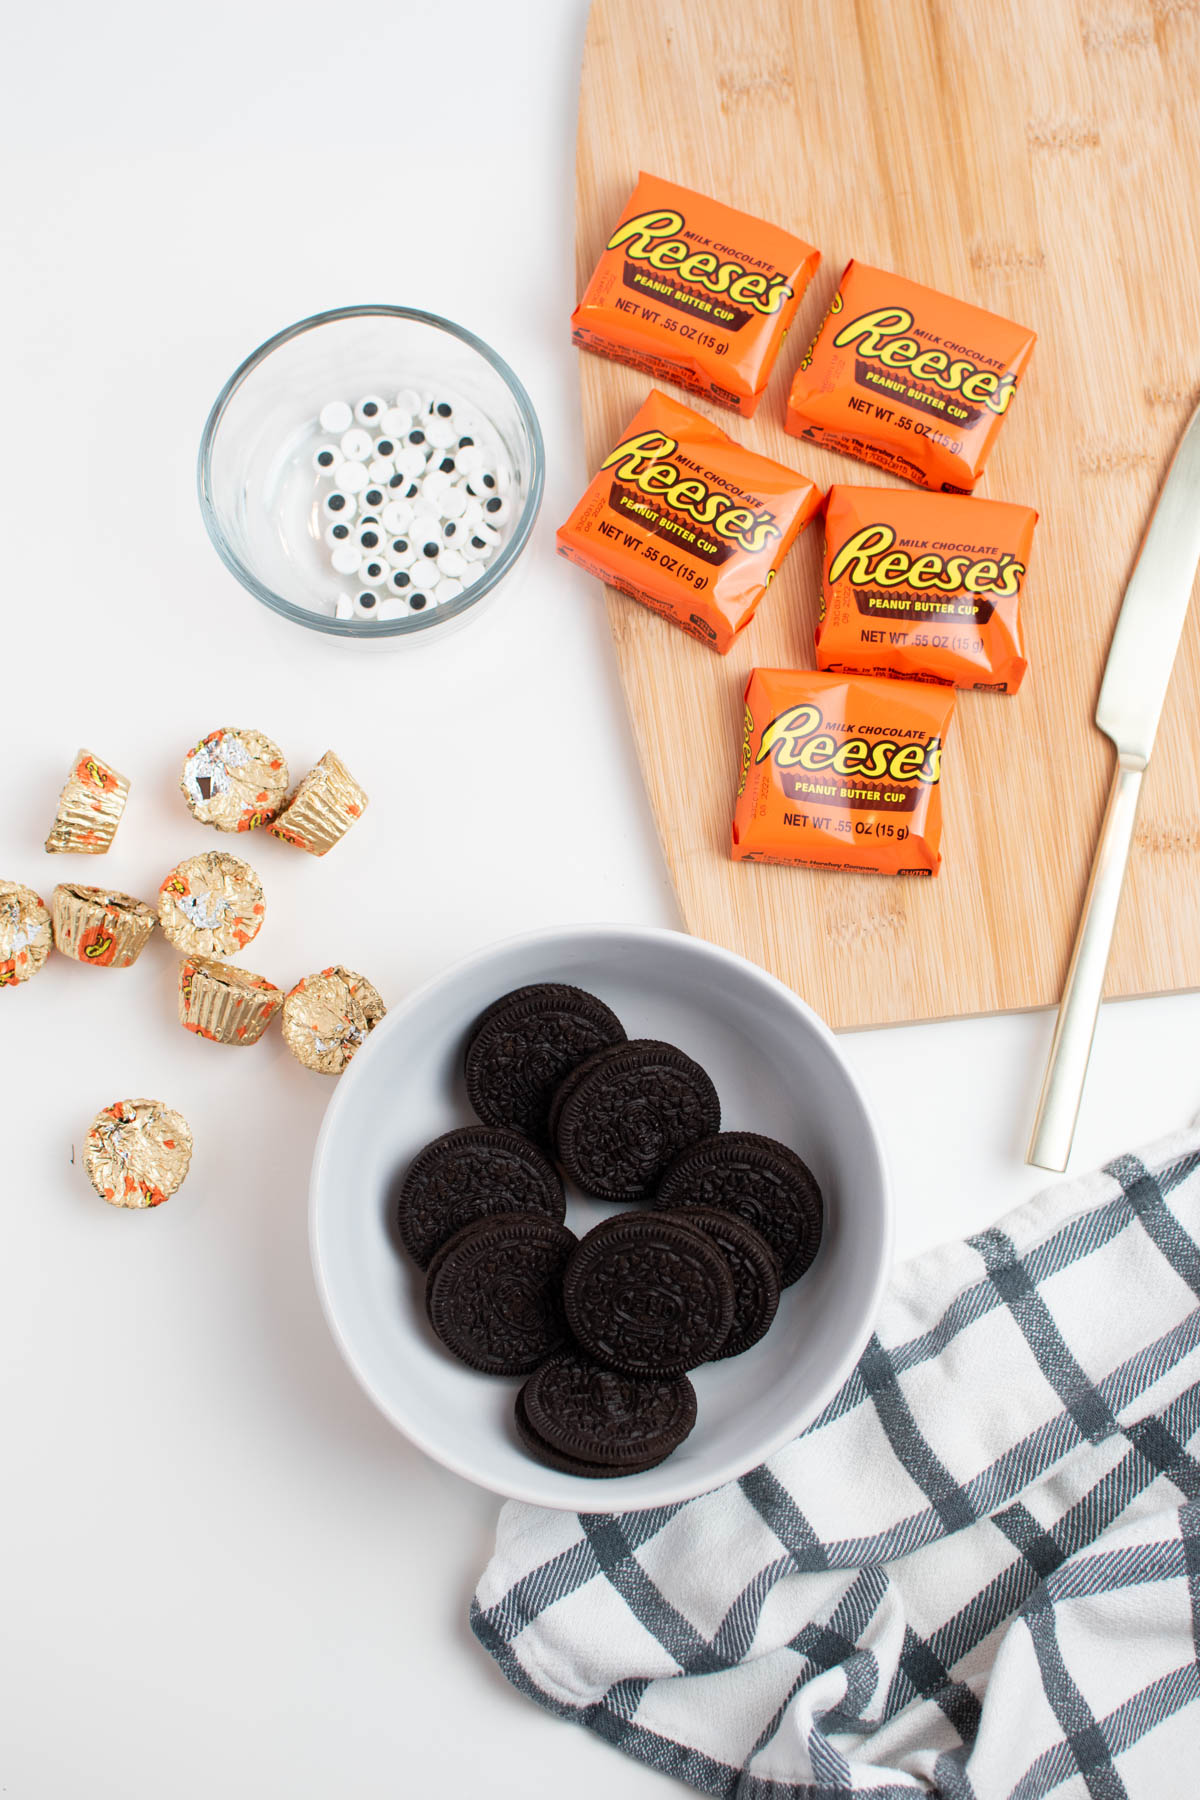 Oreo bat ingredients including Reese's cups and edible eyeballs on white table.